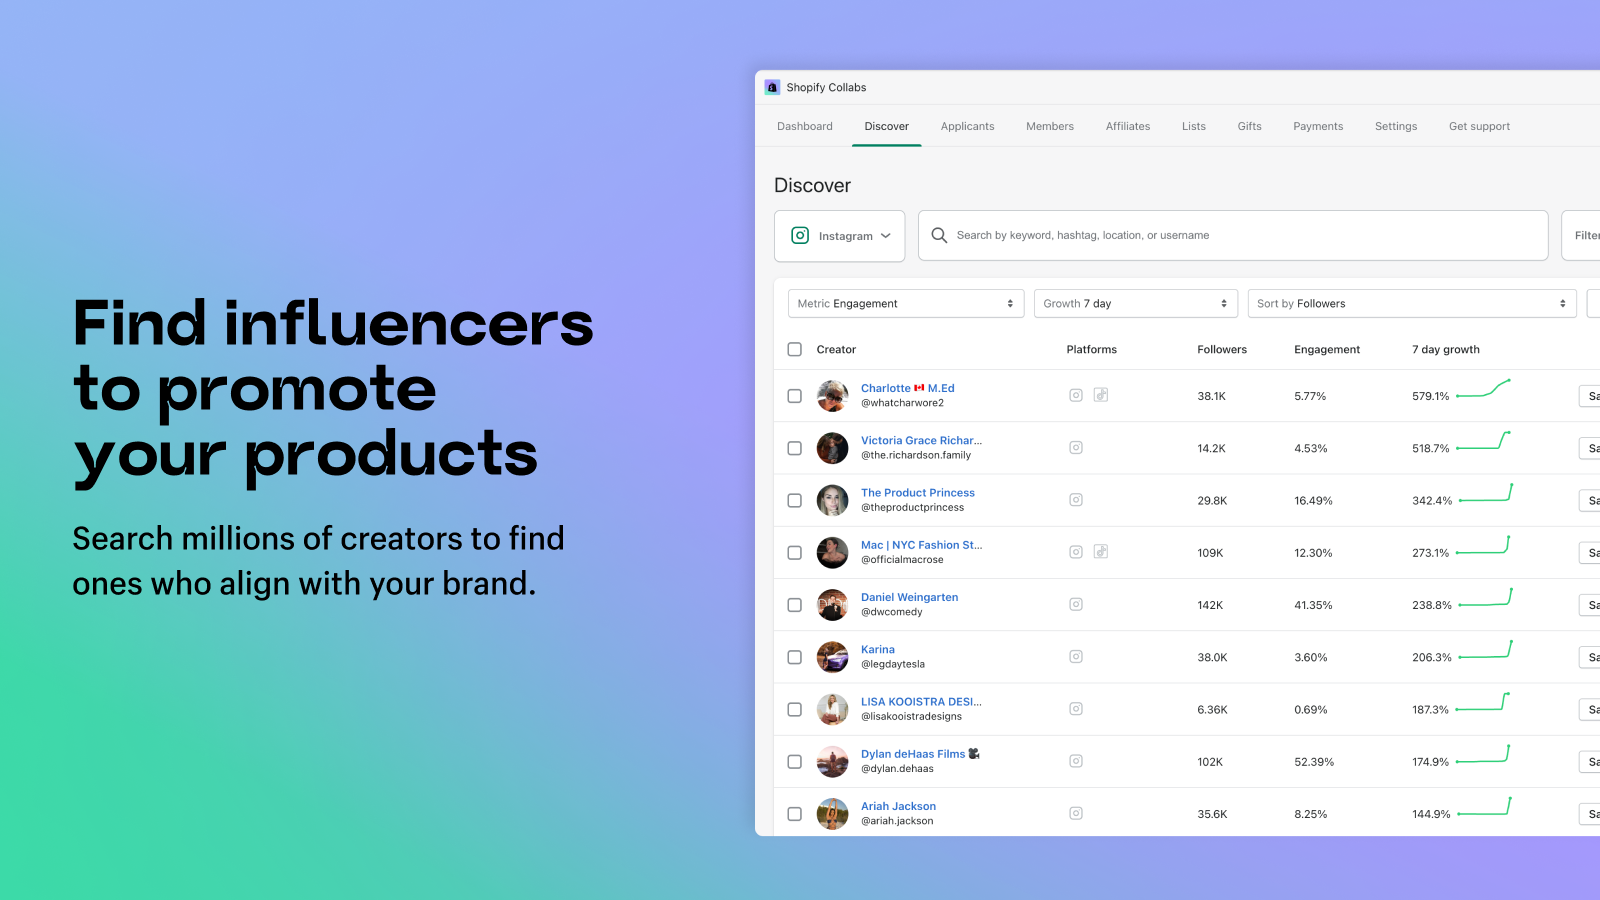 Find influencers to promote your products.